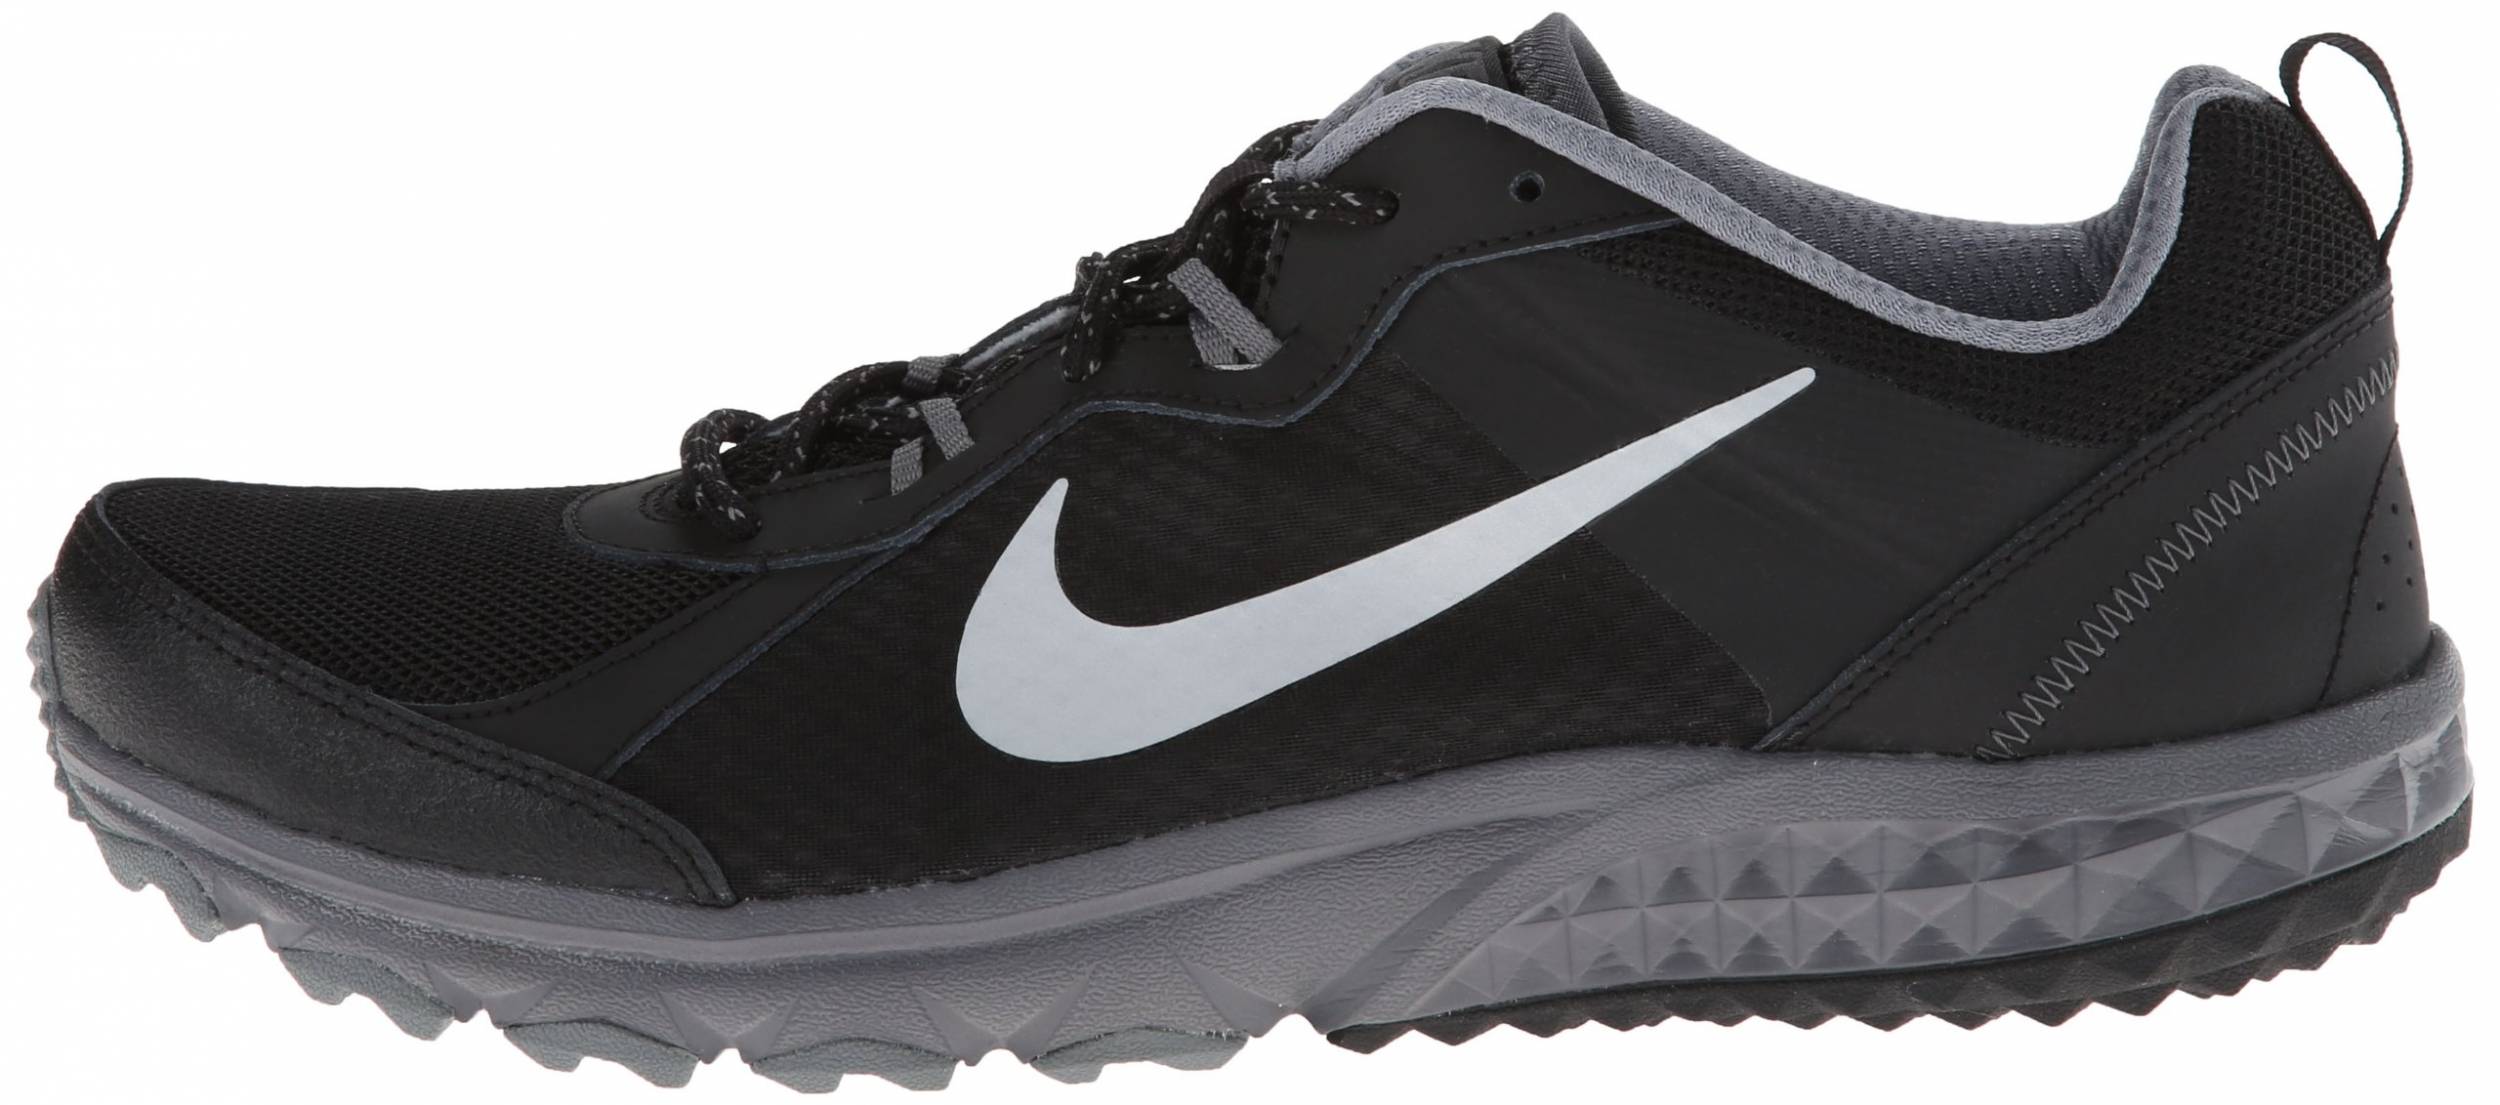 nike wide trail running shoes